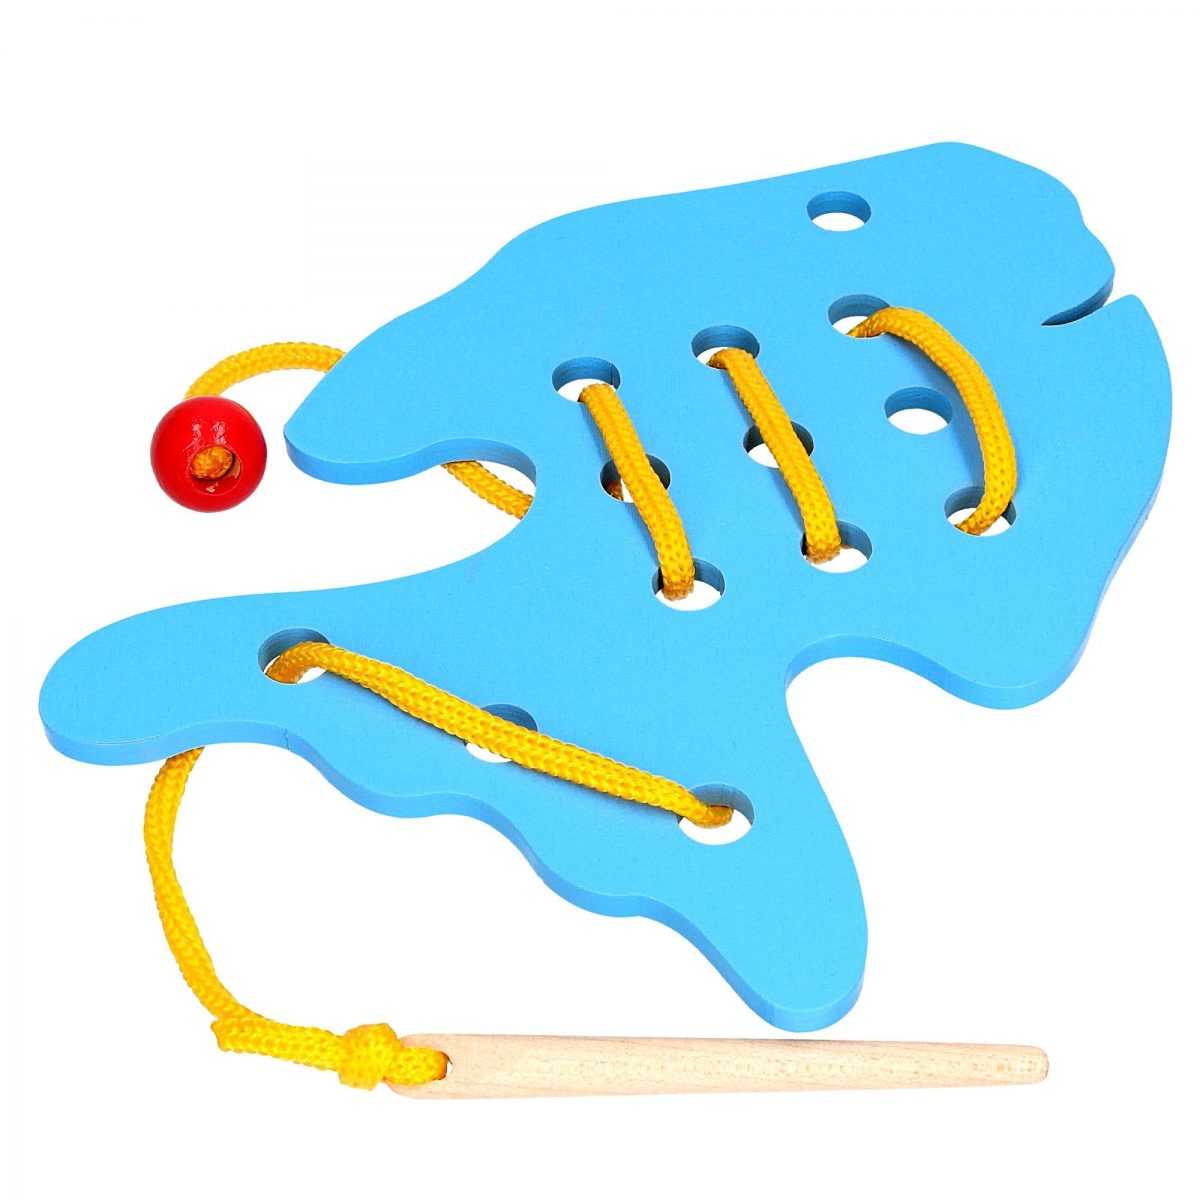 wooden fish lacing toy for the fine motor skills